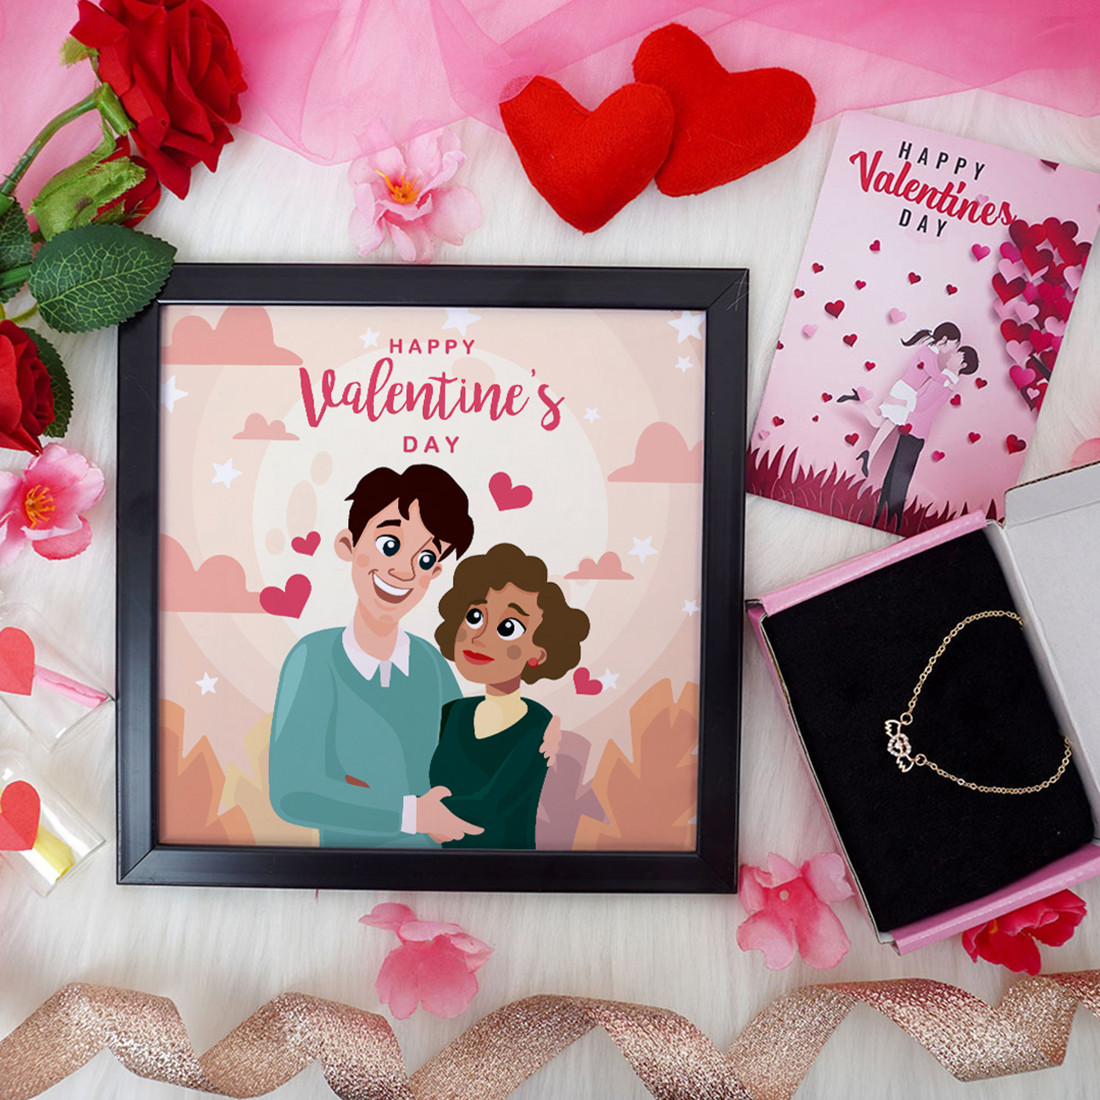 Valentine's Day Gift Set | Valentine's Day Gifts for Girlfriend | Valentine Gift for Wife | Women's Pendant/Pendant for Girl/Greeting Card | Photo Frame (8x8 Inches)